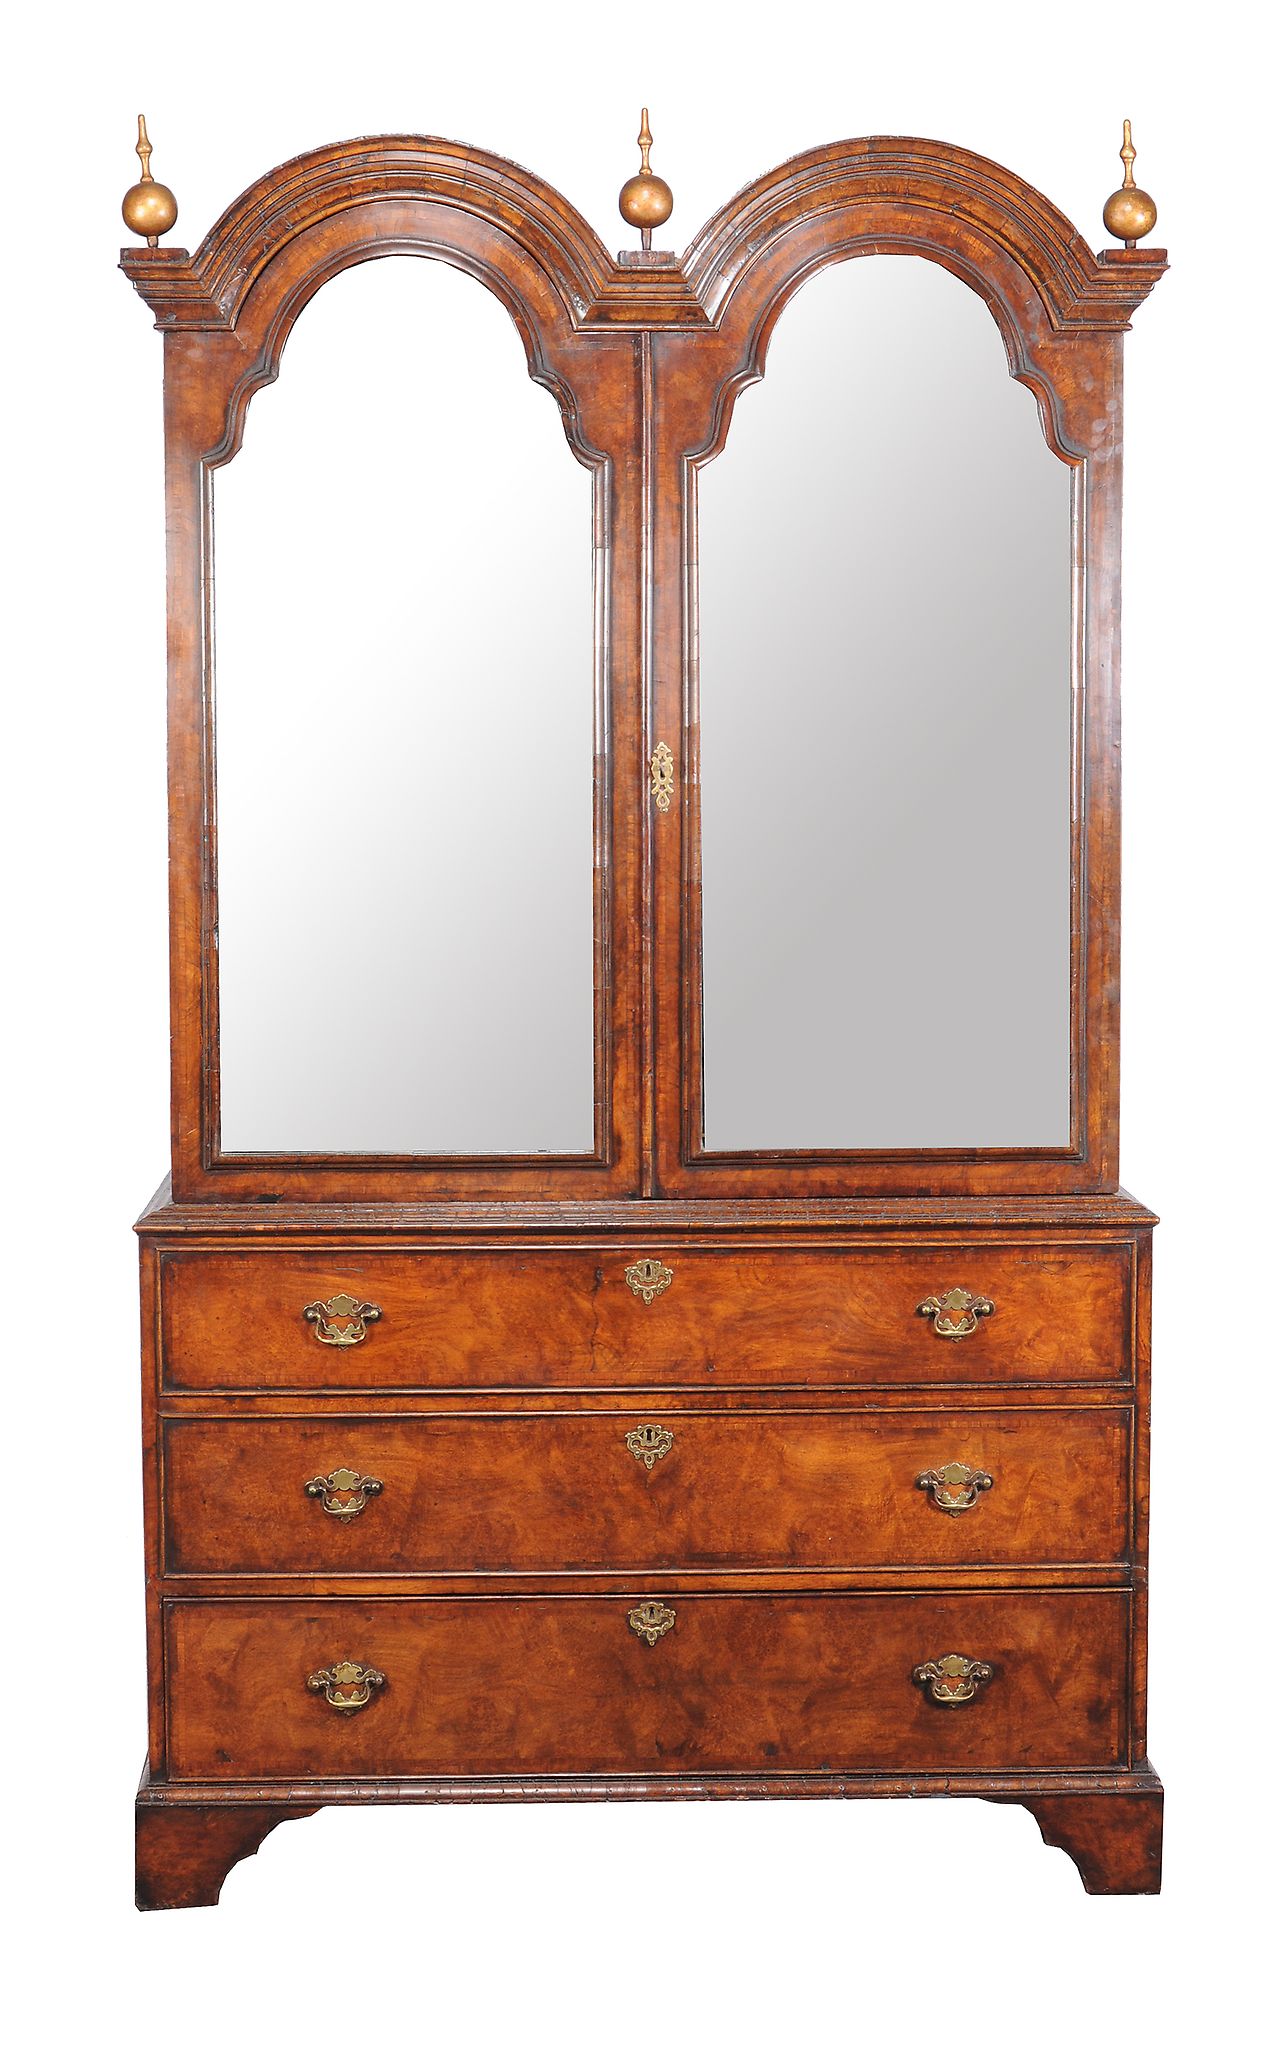 A burr walnut and crossbanded wardrobe containing some 18th century elements mirror panelled doors